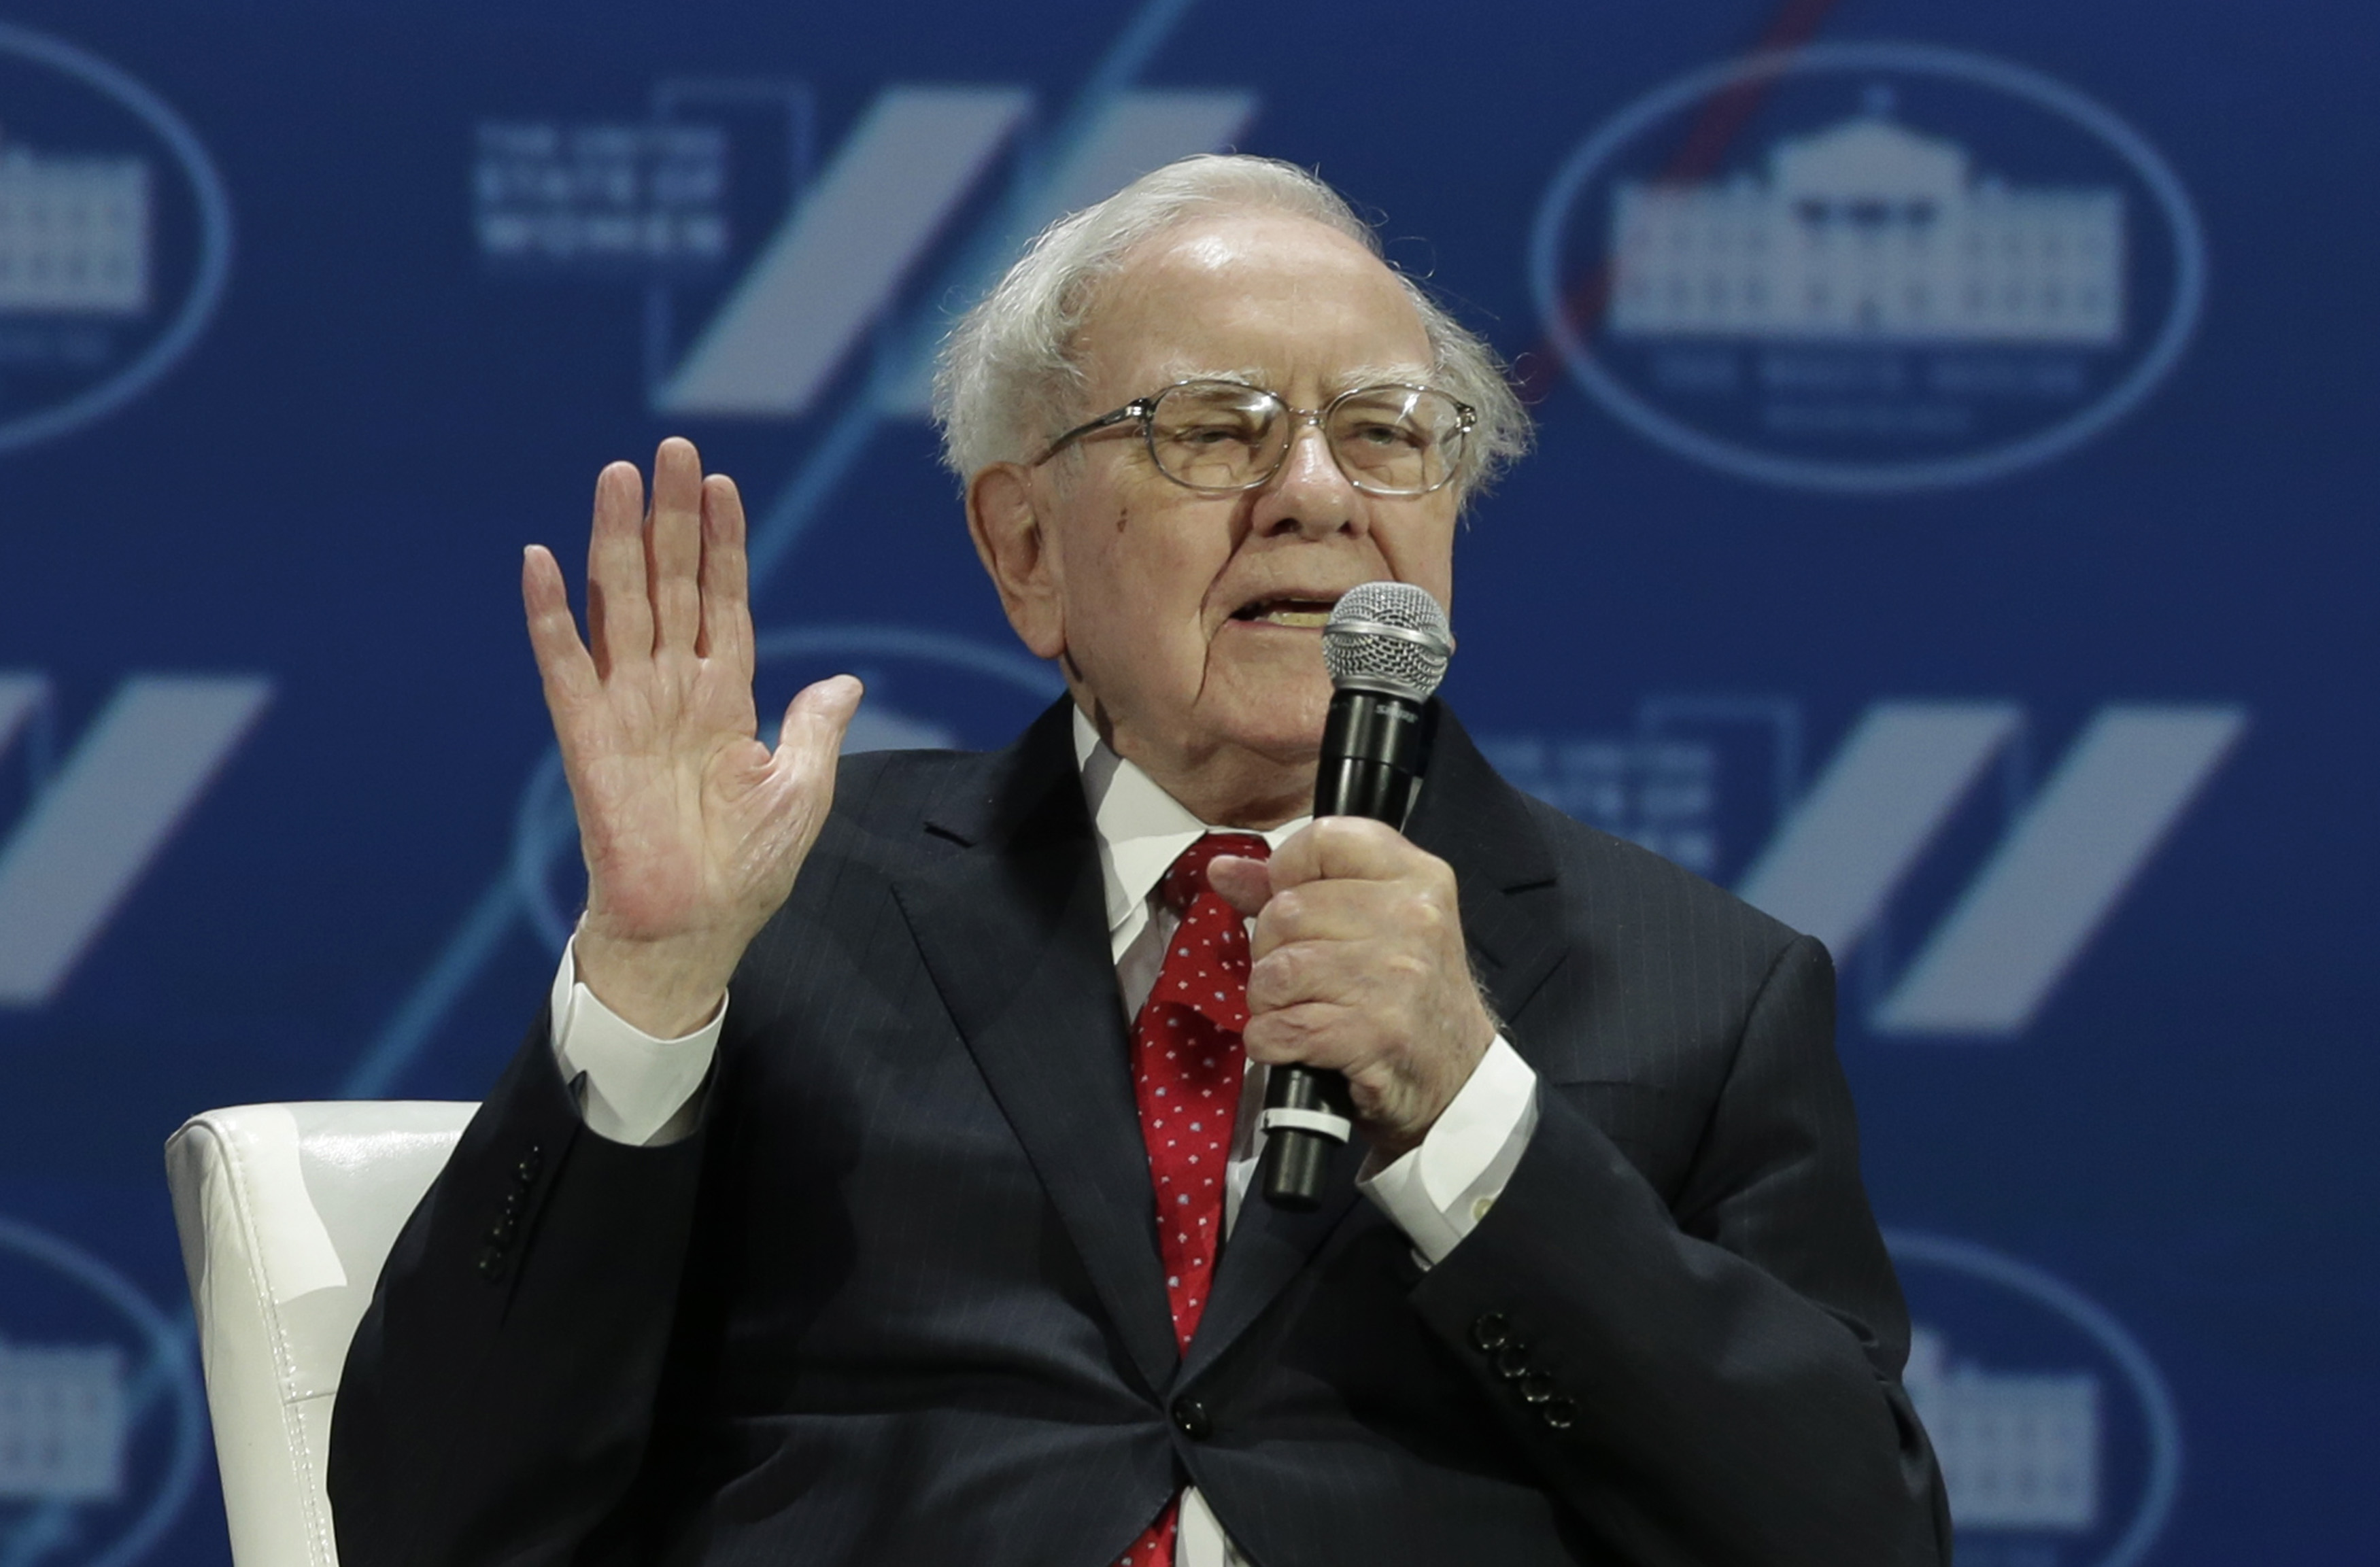 (FILES) This file photo taken on June 14, 2016 shows Investor Warren Buffett during the "United State of Women Summit" at the Washington Convention Center in Washington, DC. Billionaire investor Warren Buffett said November 11, 2016 the US would move forward after a bruising presidential campaign and that he would be happy to advise President-elect Donald Trump if asked. "I would do that with any president," Buffett, a strong supporter of Trump rival Hillary Clinton, told CNN. "If any president asked me for help in any way, that's part of being a citizen."  / AFP PHOTO / YURI GRIPAS